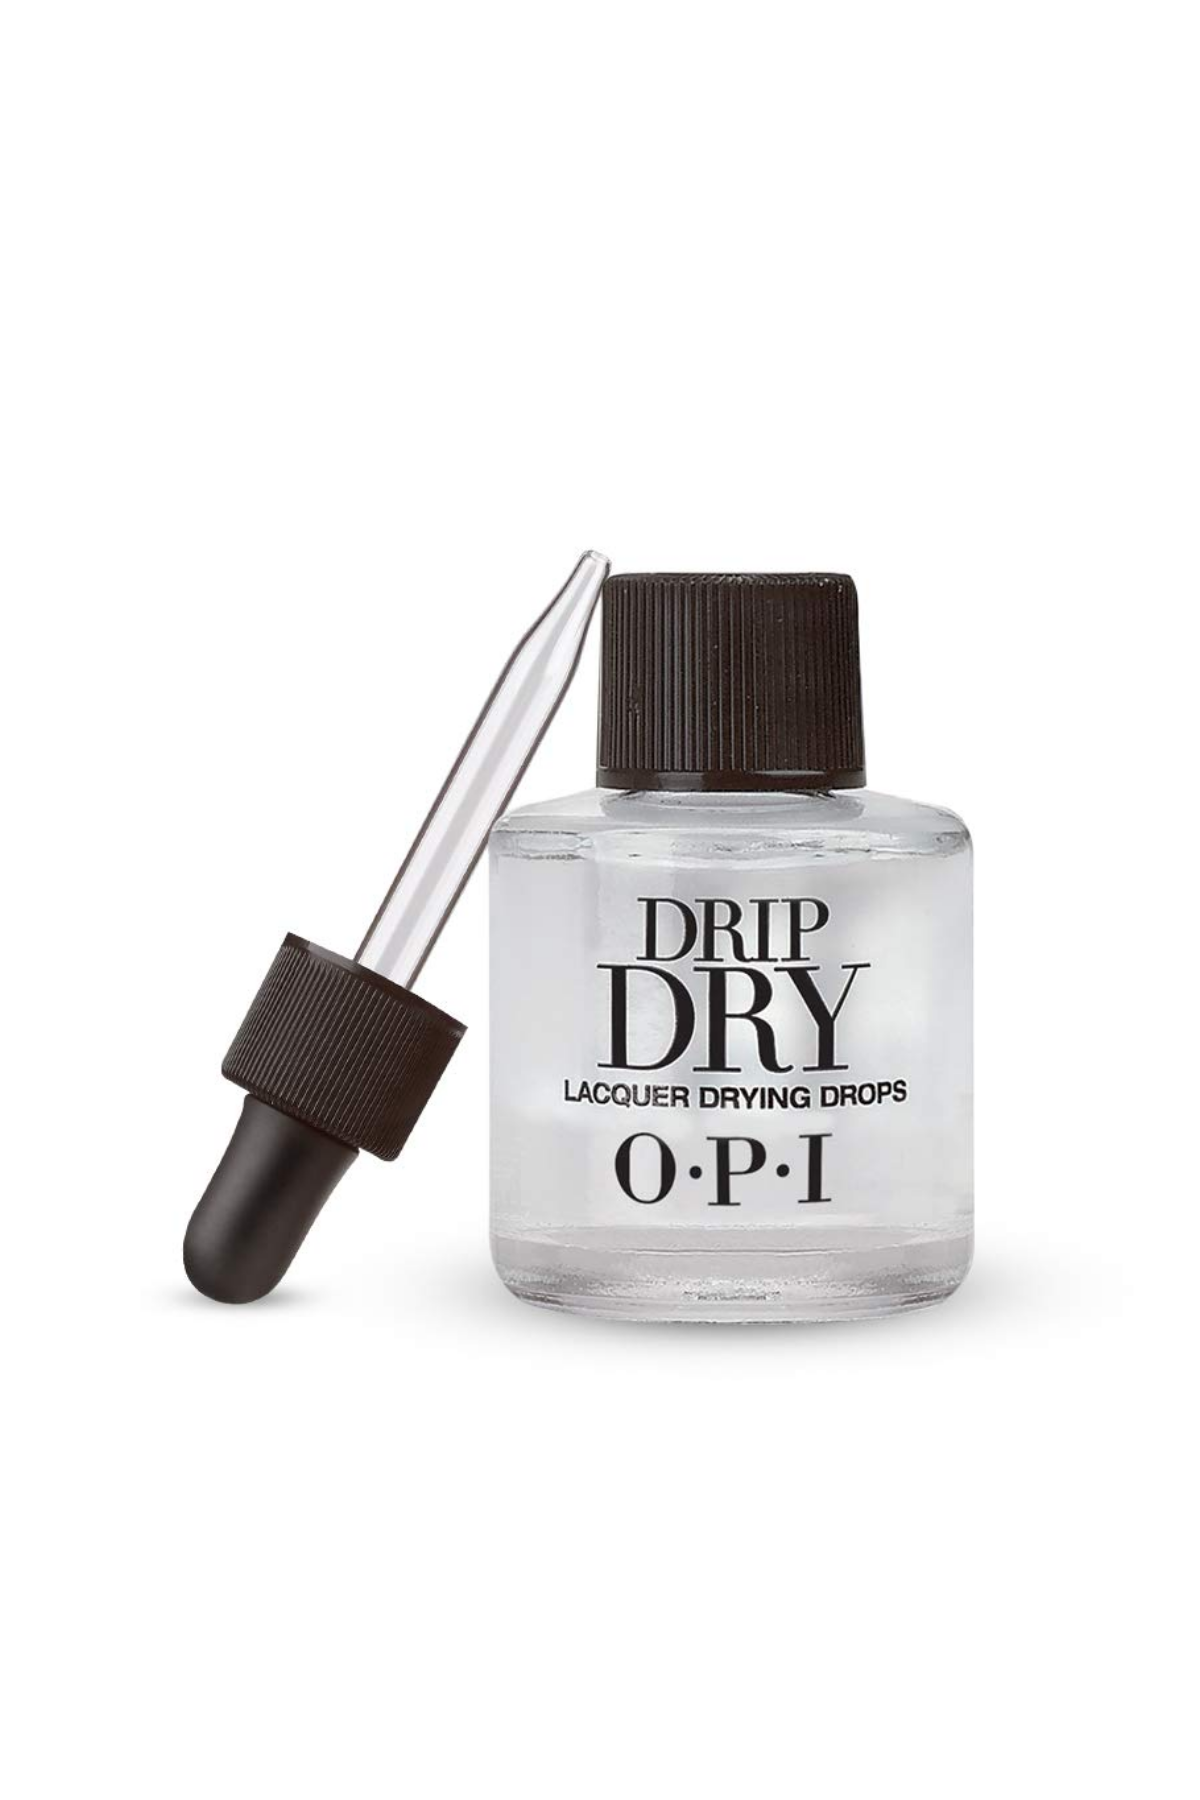 Drip Dry Nail Lacquer Drying Drops